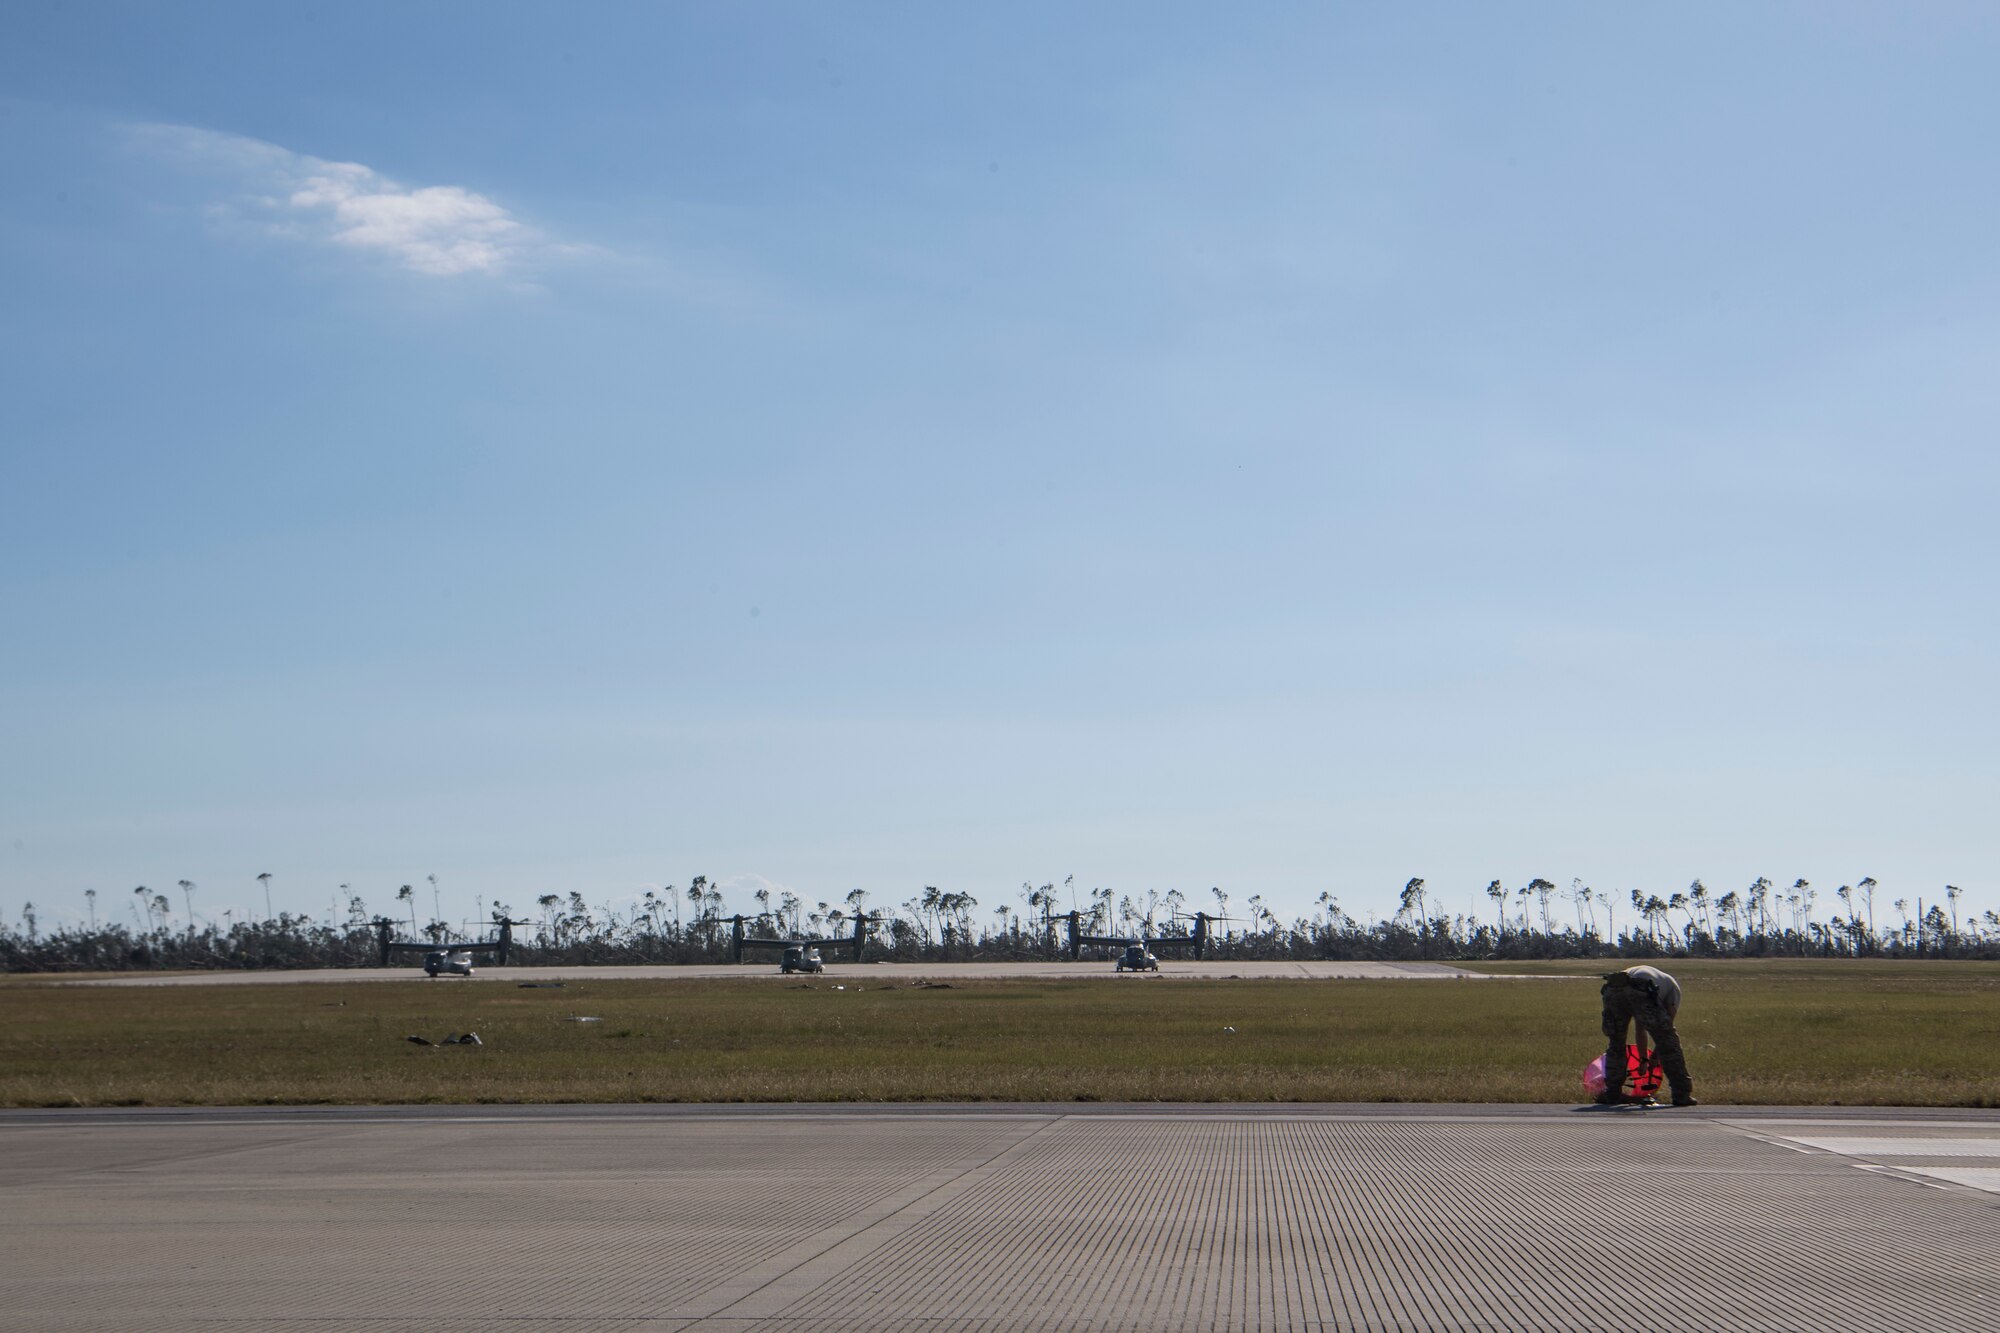 A Special Tactics Airman with the 23rd Special Tactics Squadron take down runway panels at Tyndall Air Force Base, Florida, Oct. 14, 2018.